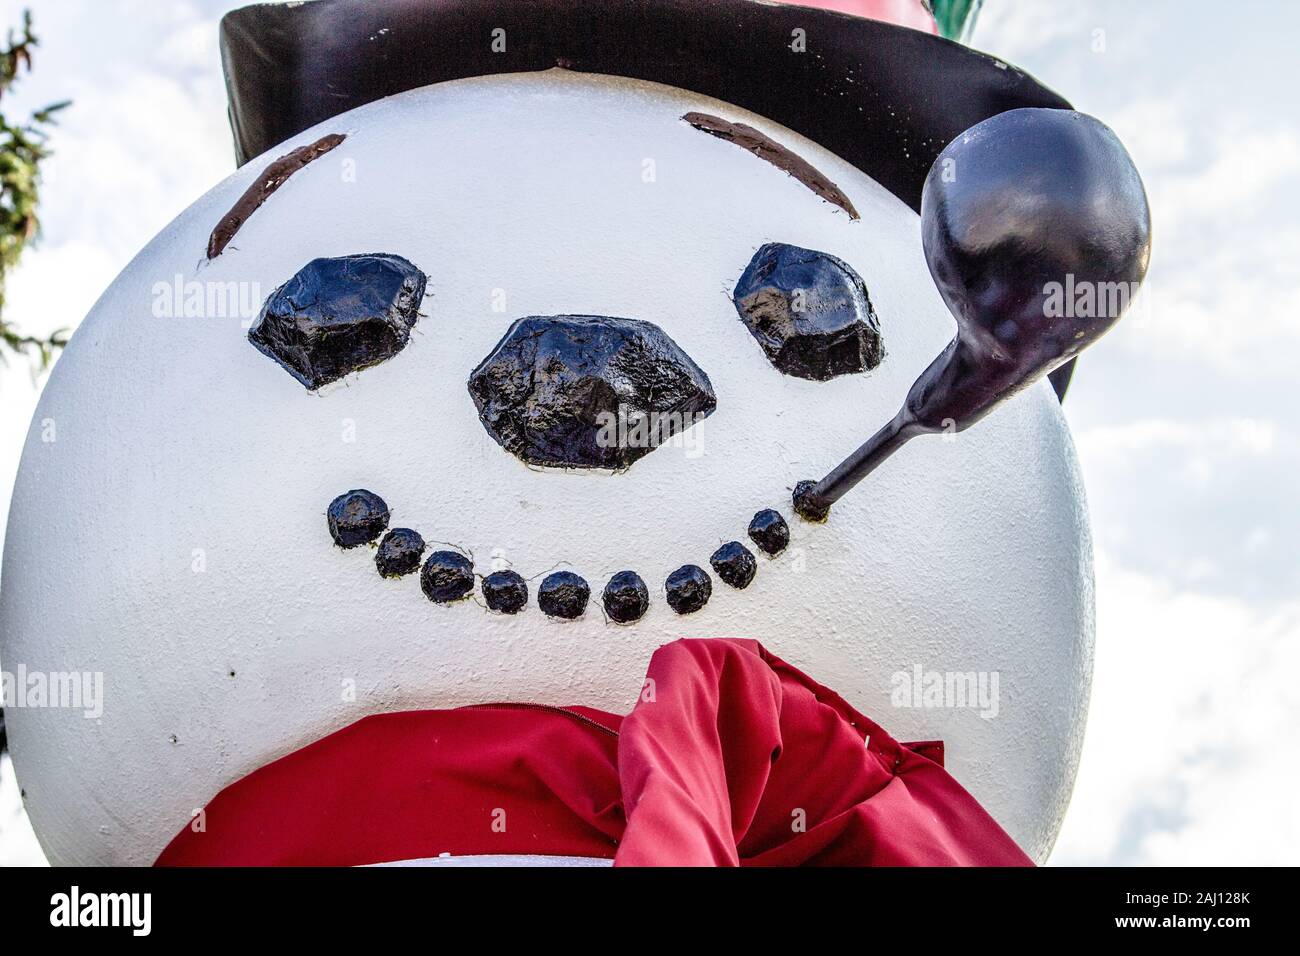 Smiling Snowman. Close up of snowman smiling with red scarf and pipe. Stock Photo